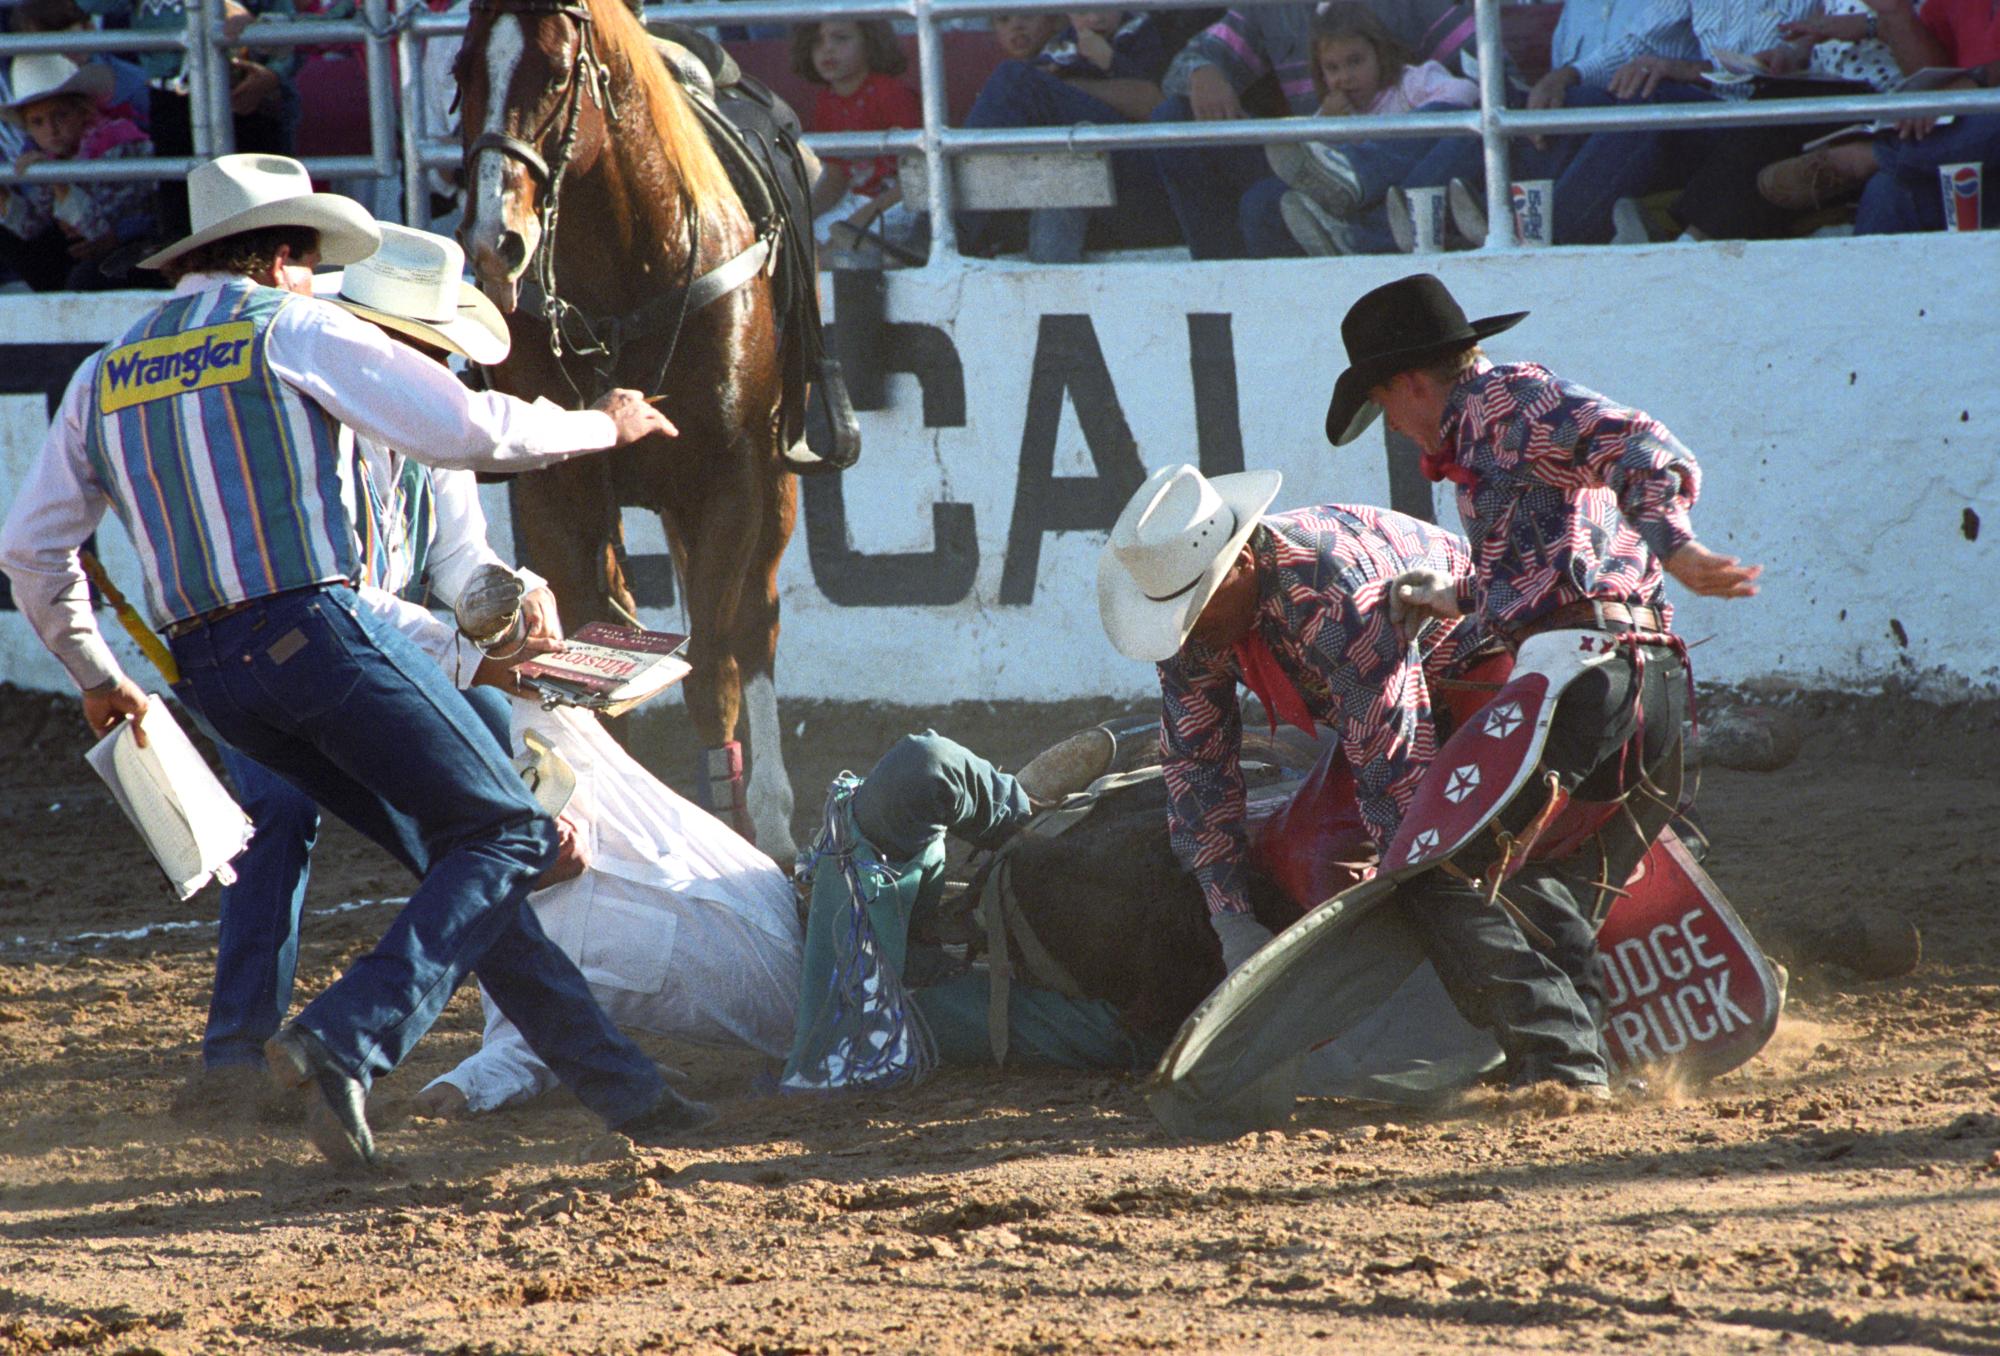 Imperial Valley Rodeo (1992) - Tough Hombre #6